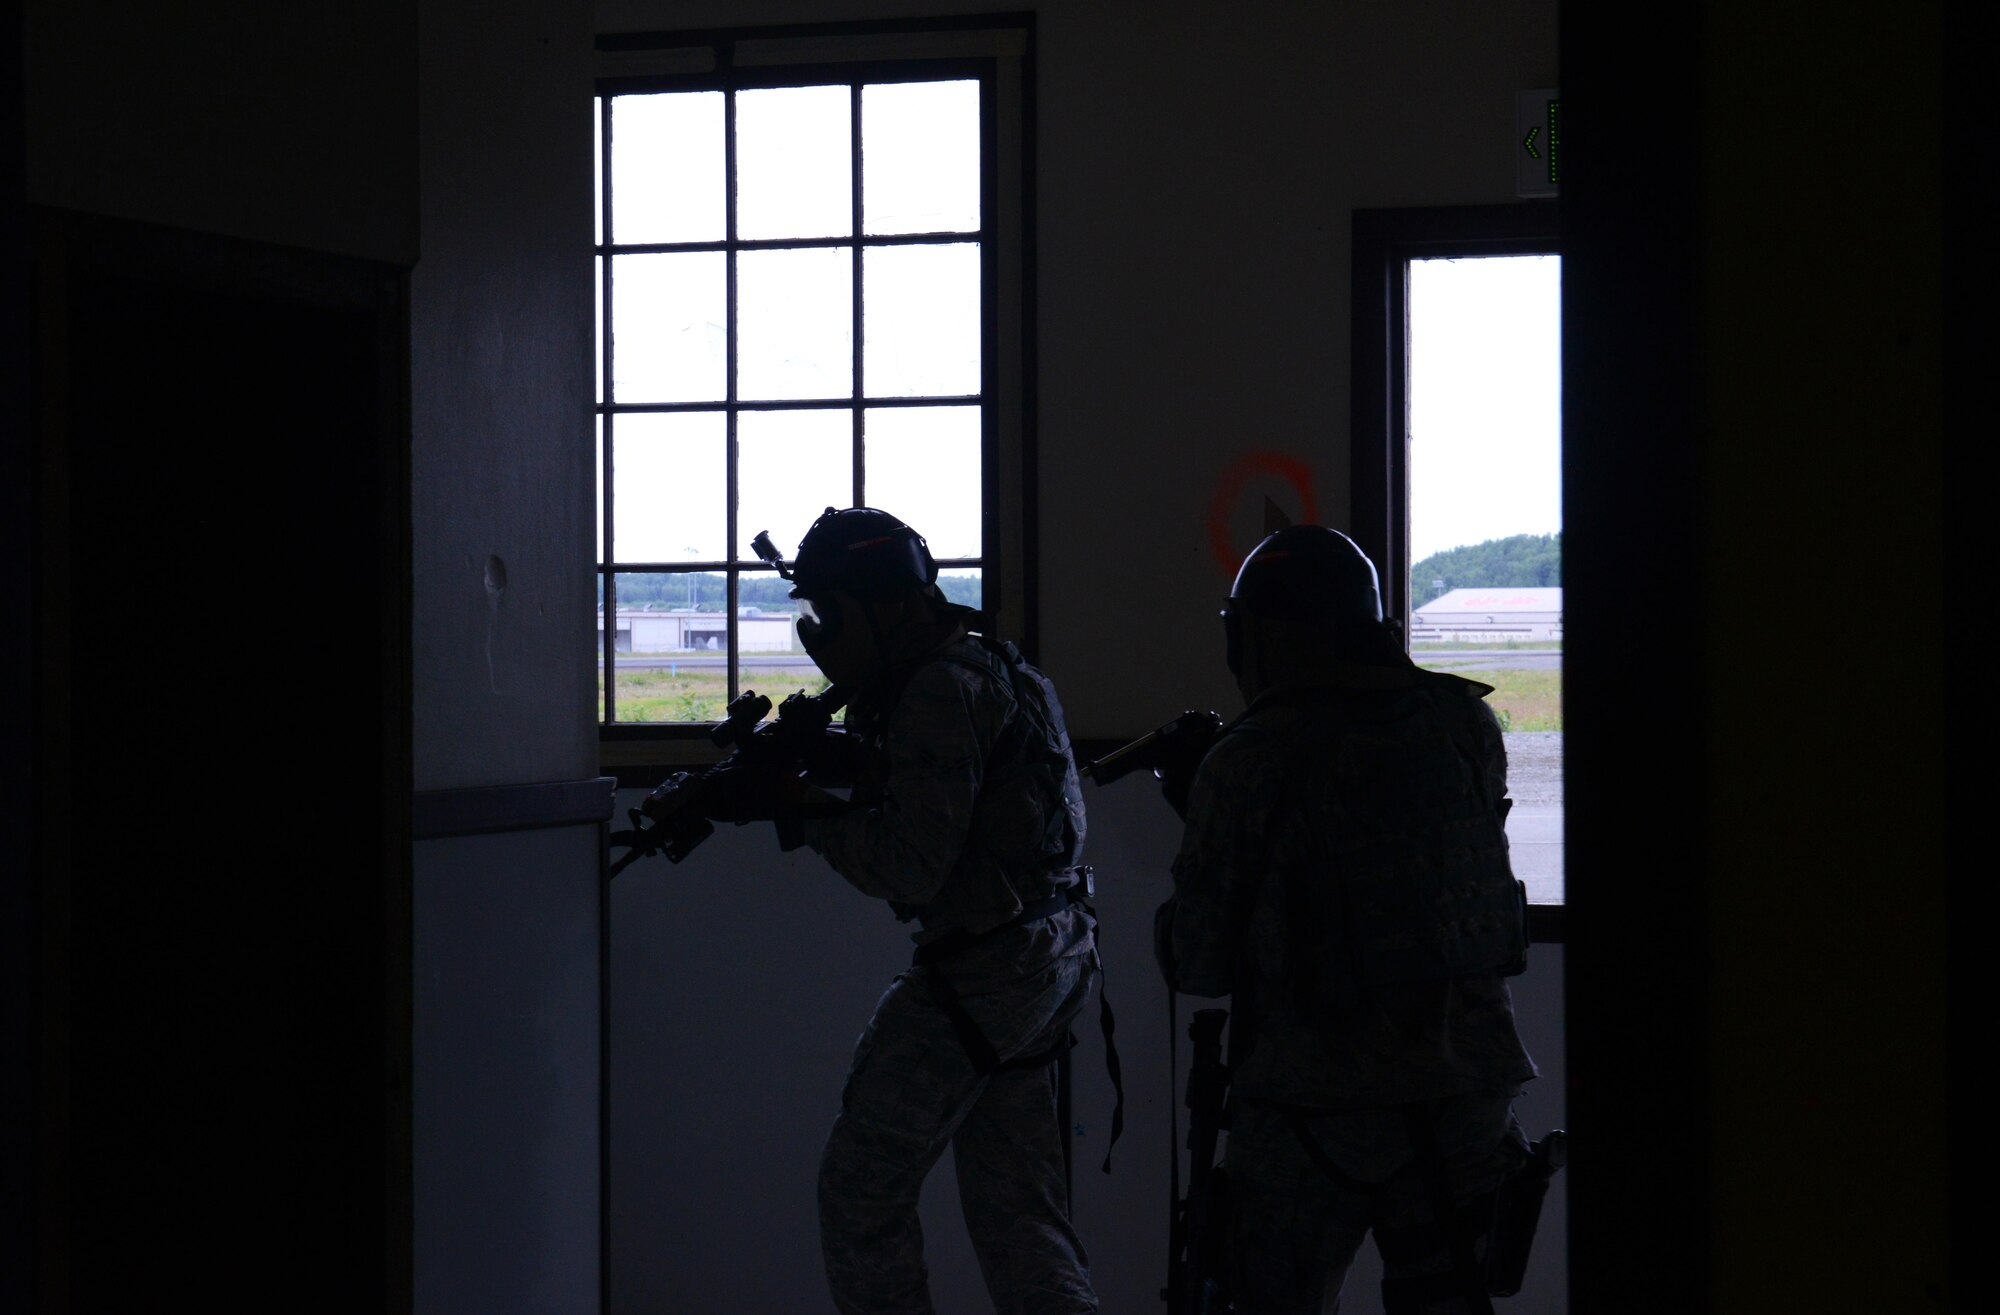 A team of 673d Security Forces Squadron members sweep a room during active-shooter training at Joint Base Elmendorf-Richardson, Alaska, July 18, 2017. Security forces trained in high-stress environments with hostages and aggressive perpetrators, so they learned how to appropriately respond and handle various hostile situations. 